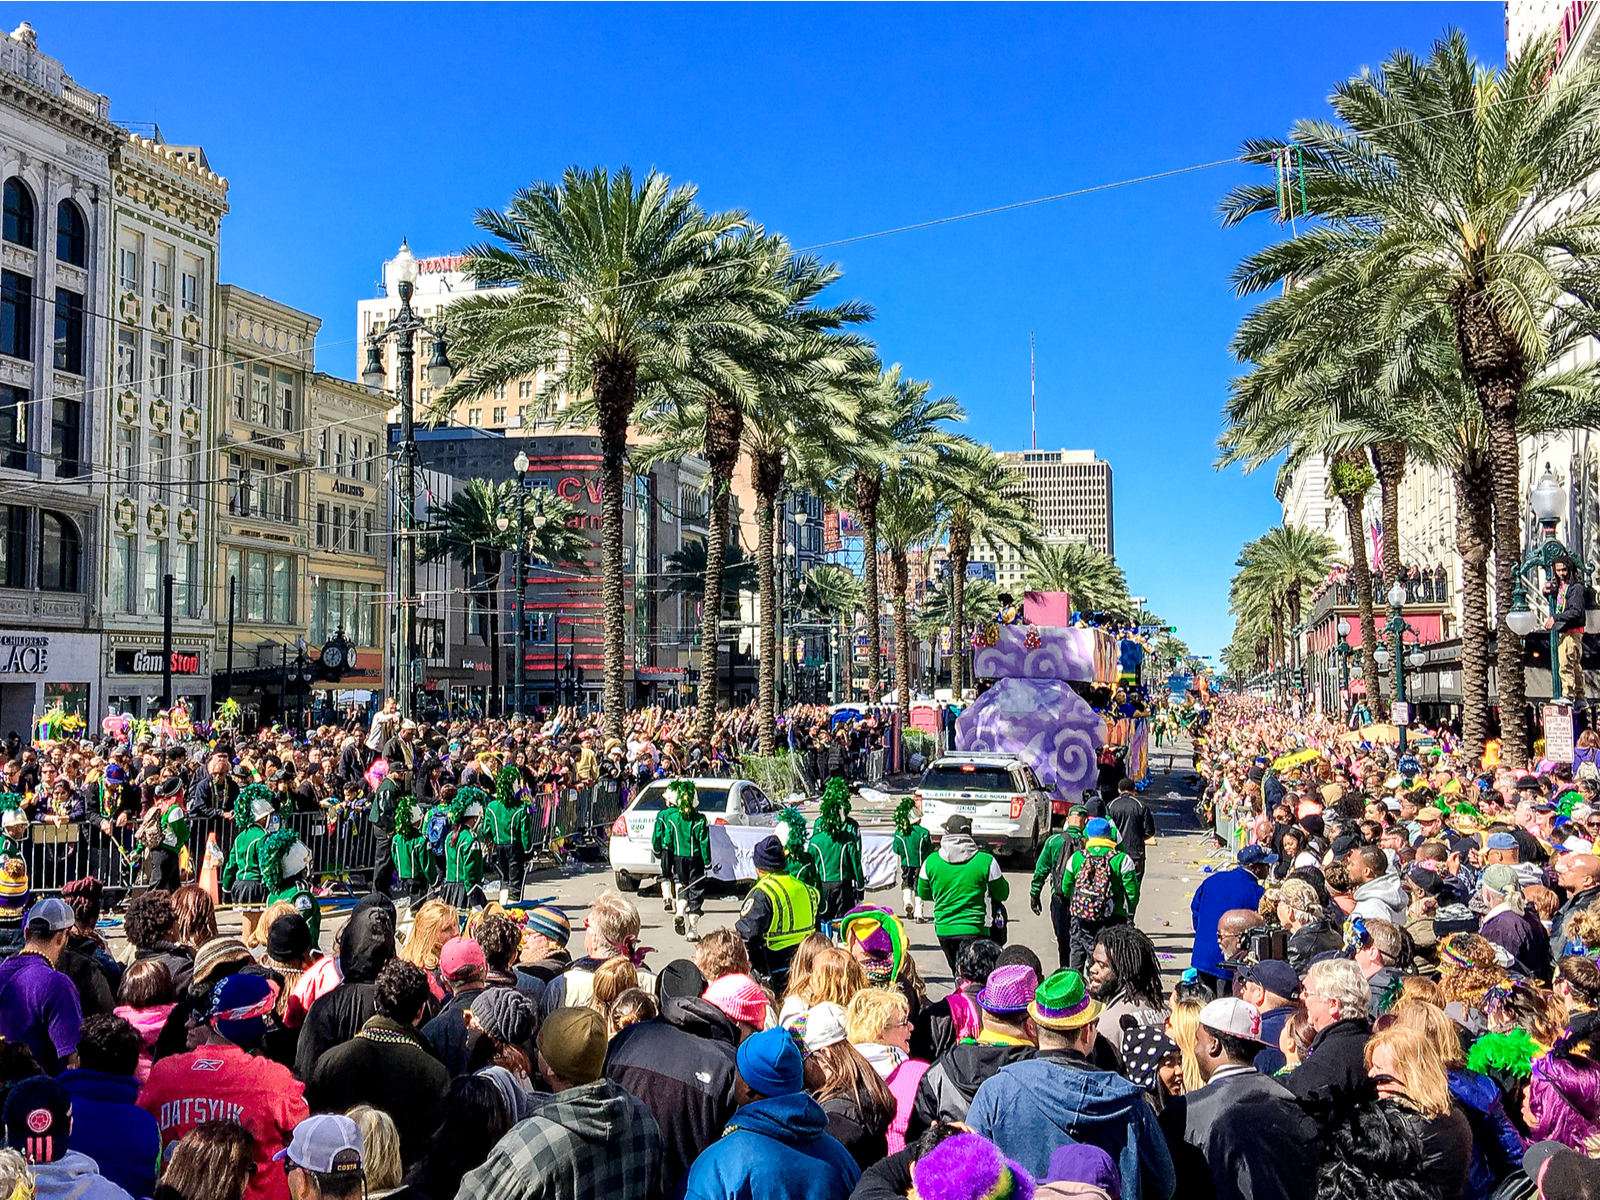 Mardi Gras pictured during the best time to visit New Orleans, in the middle of Summer